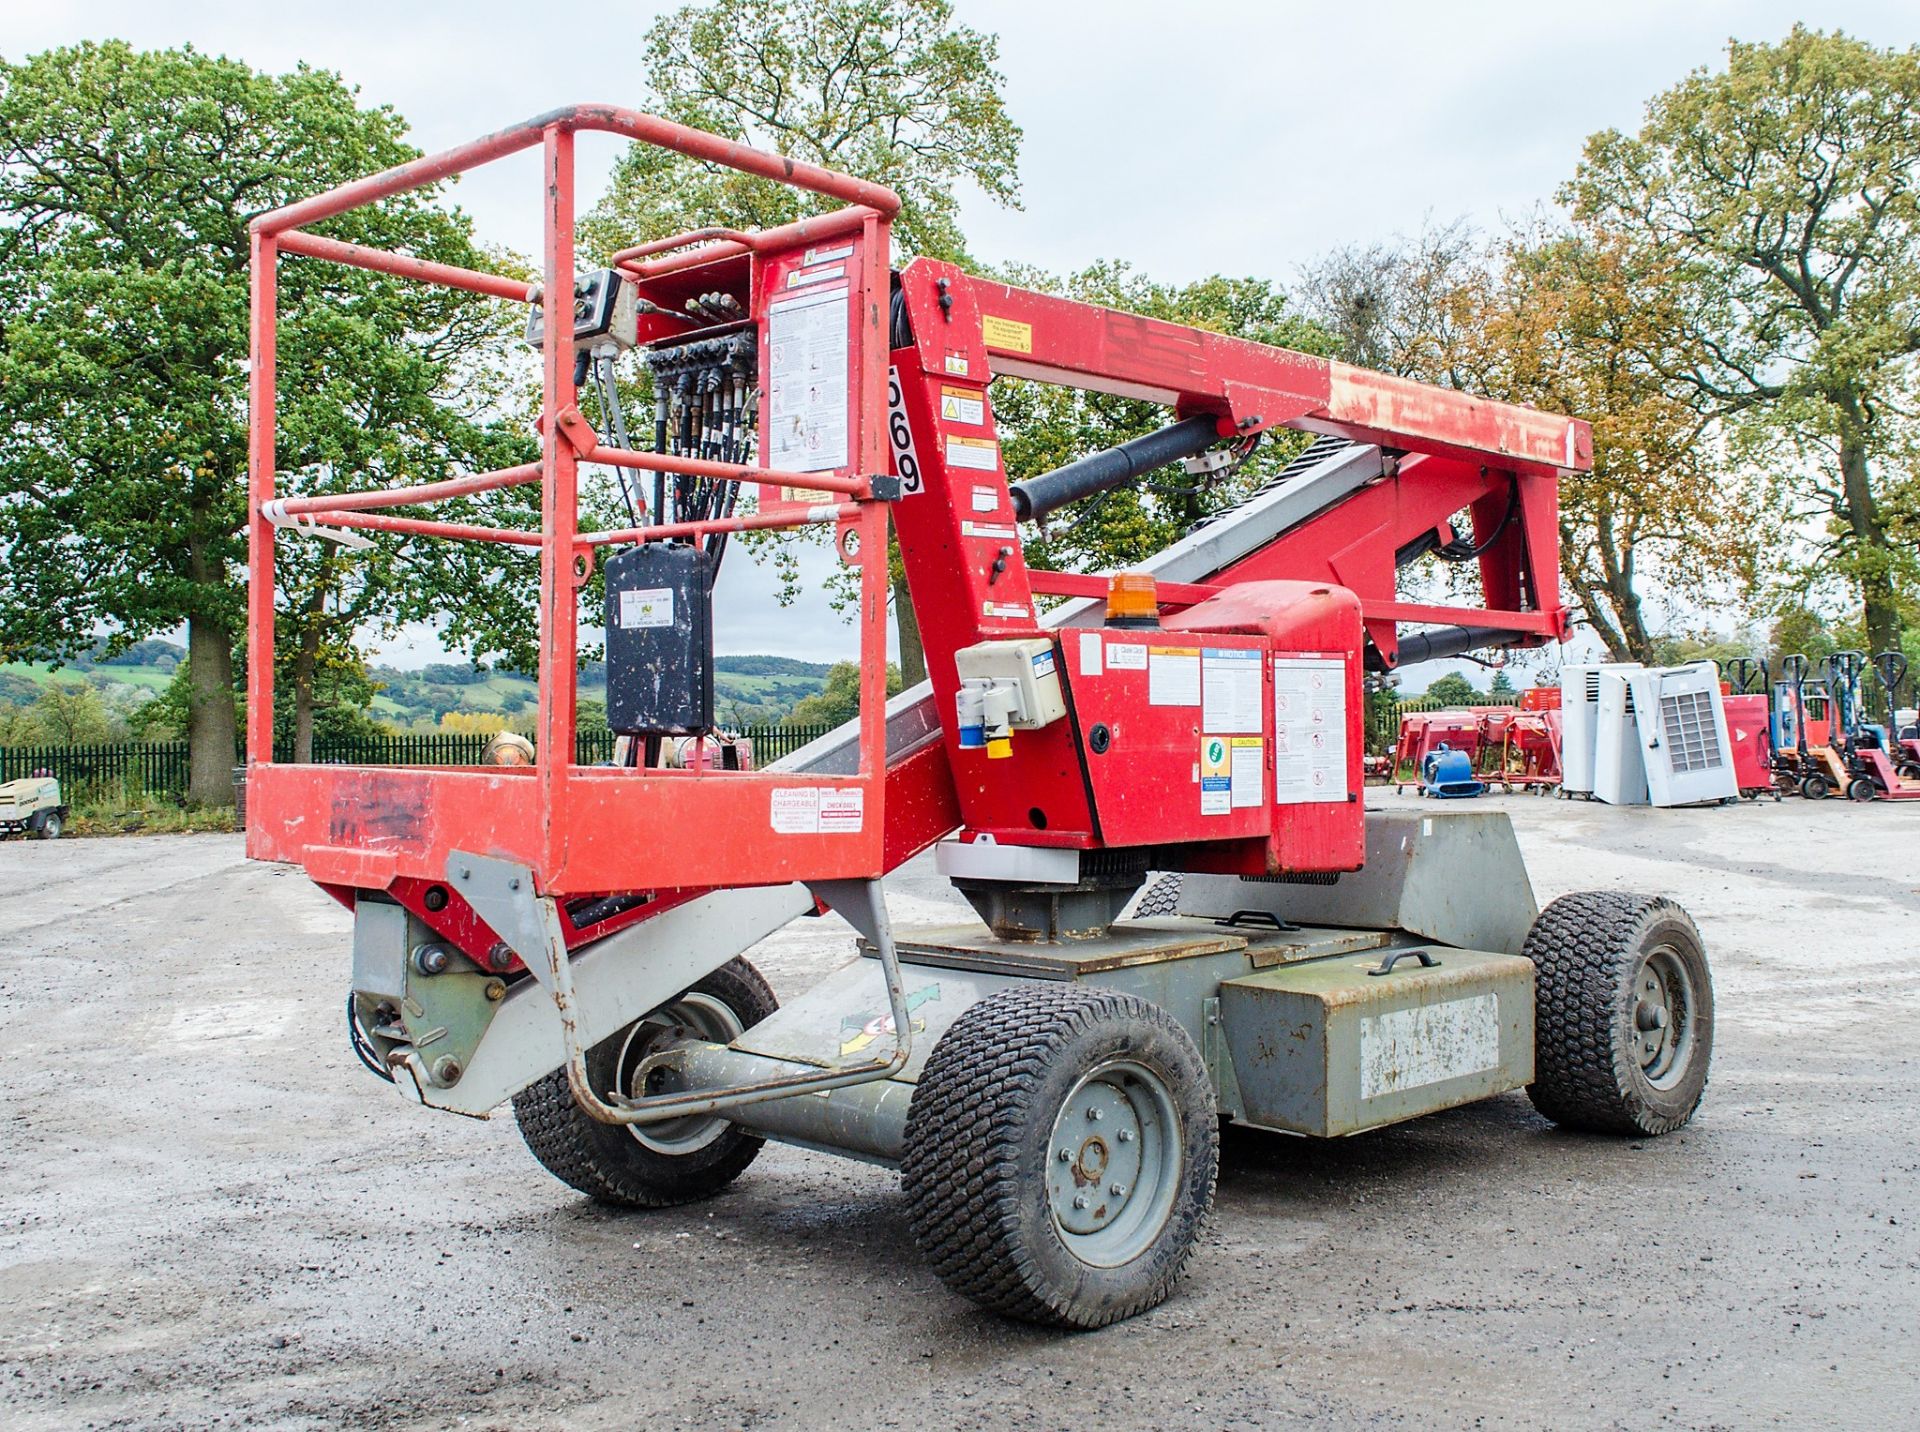 Nifty HR12NDE Heightrider diesel/battery electric articulated boom access platform Year: 2010 Serial